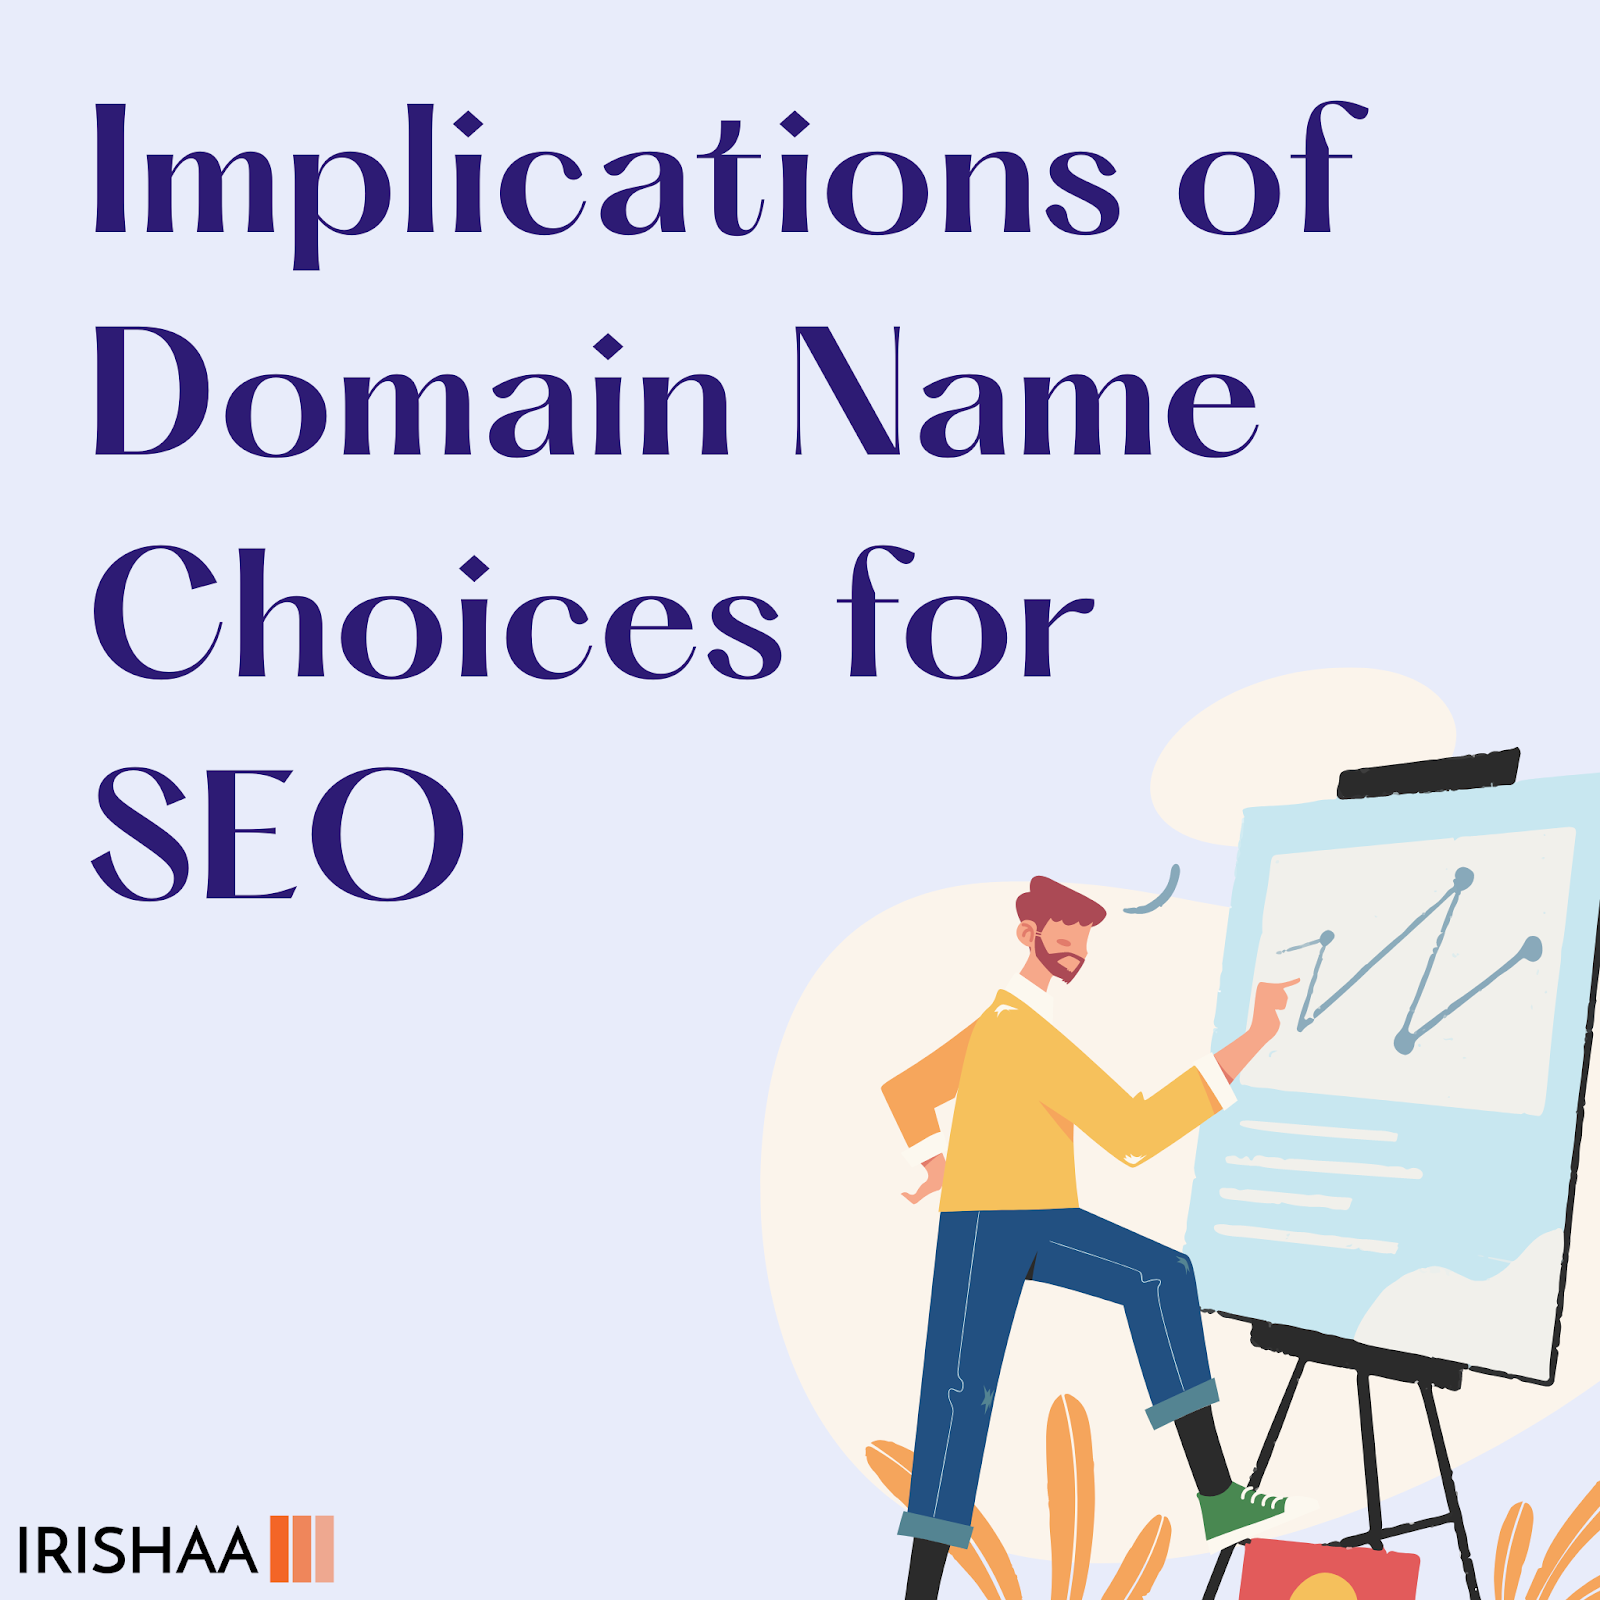 Implications of Domain Name Choices for SEO
